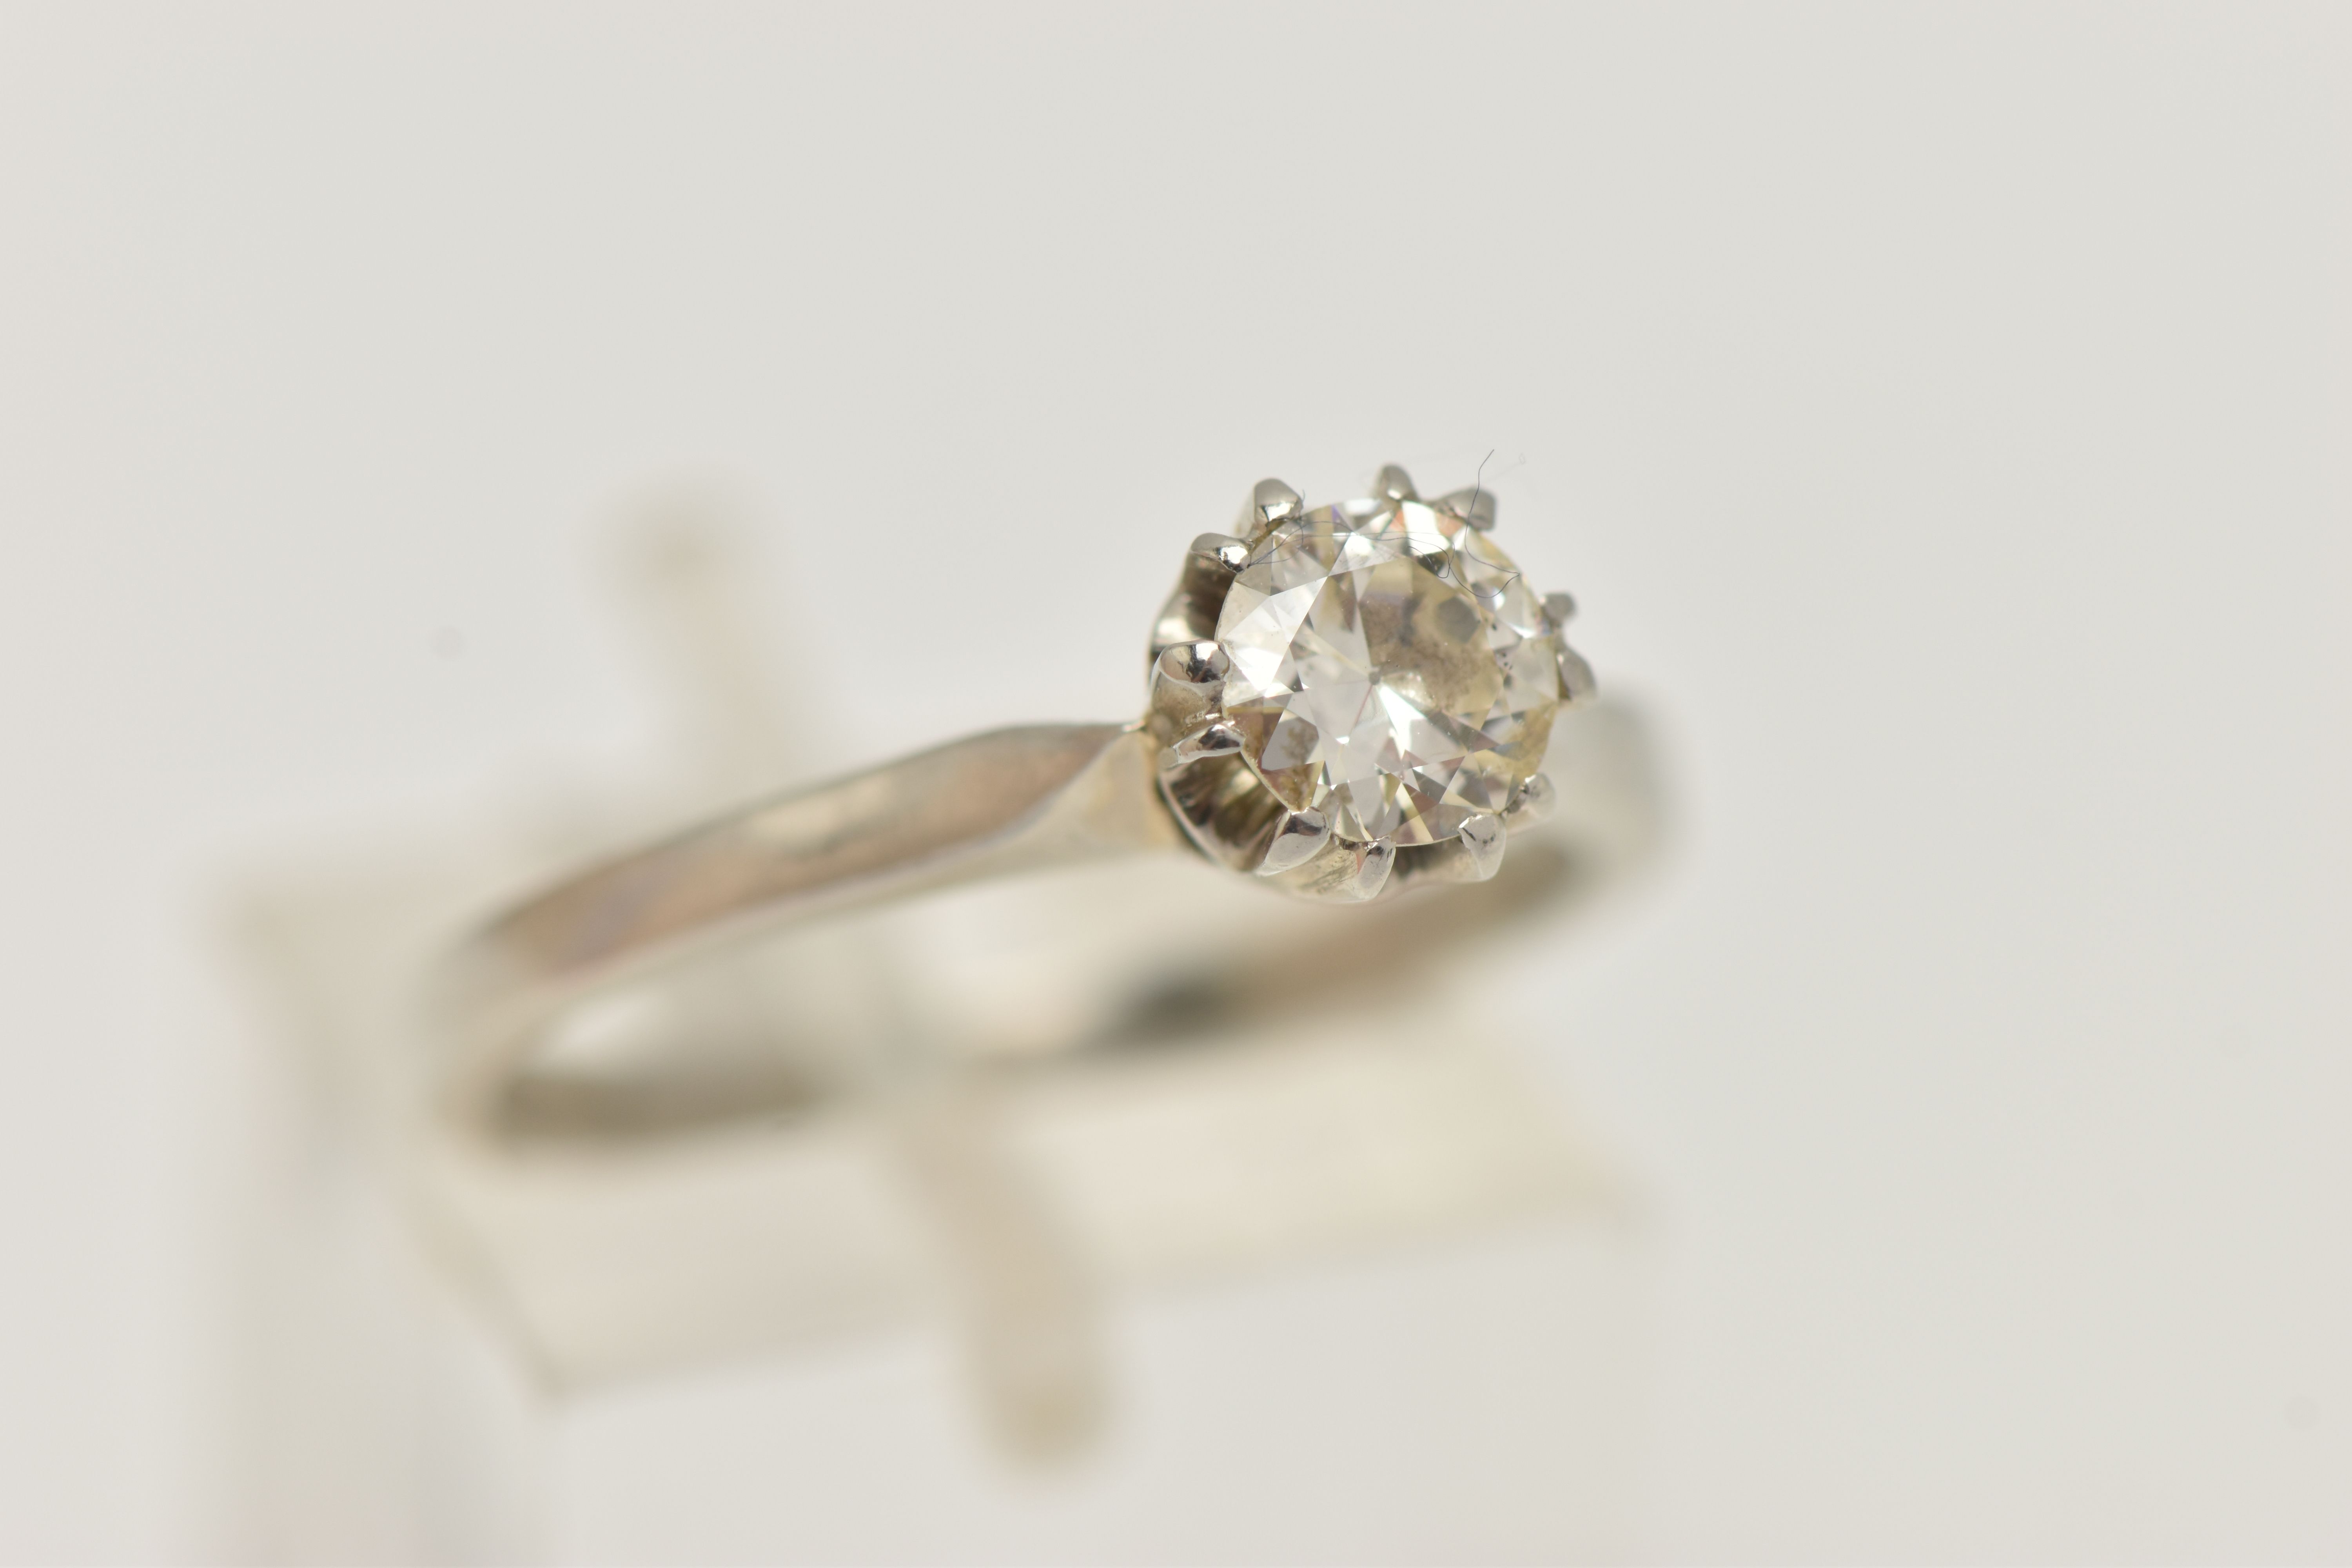 A DIAMOND SINGLE STONE RING, set with a transition cut diamond, measuring approximately 5.30 x 5. - Image 4 of 4